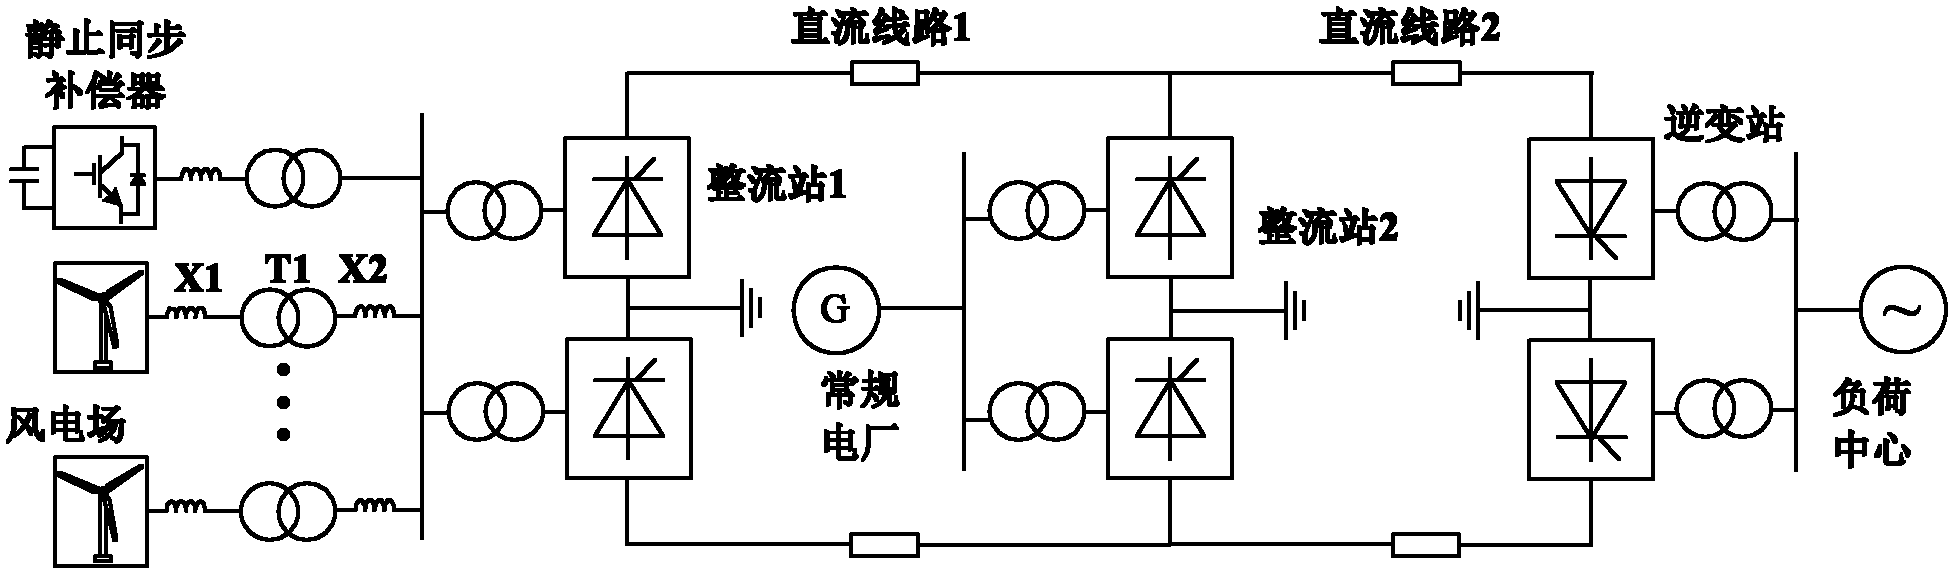 Multi-terminal DC (Direct Current) power transmission system for combined synchronization of wind power plant and conventional power plant